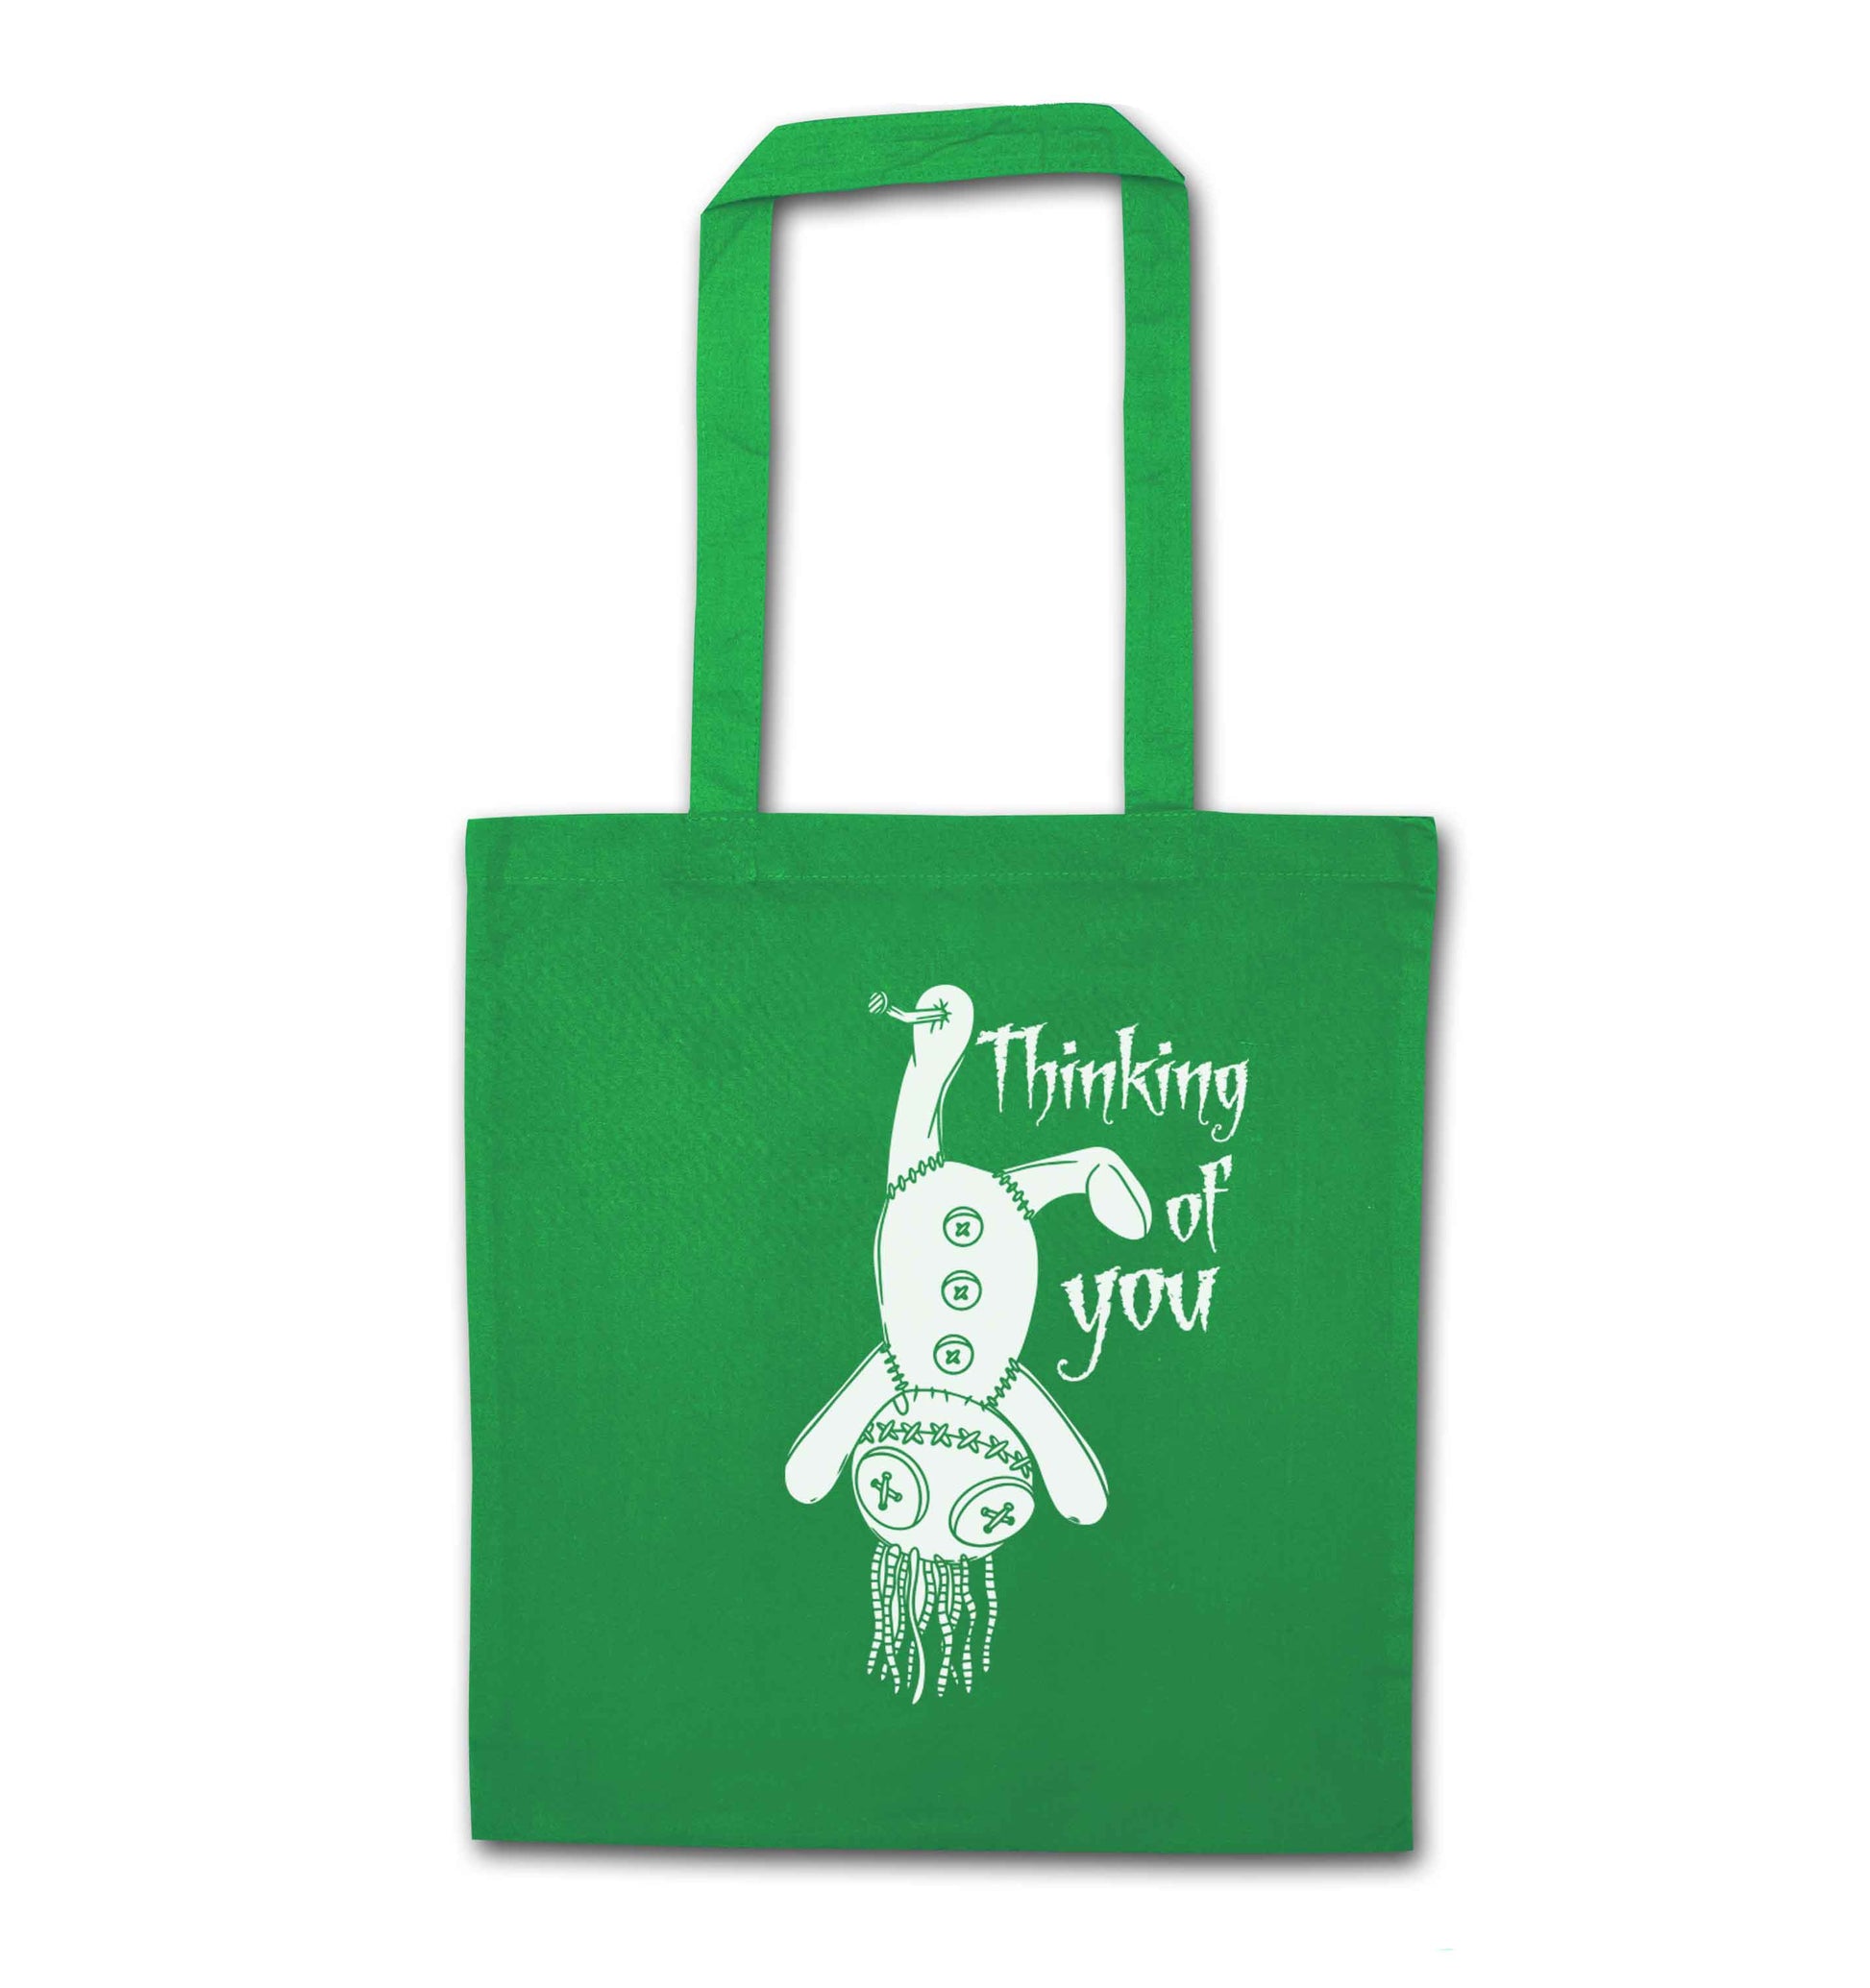 Thinking of you green tote bag